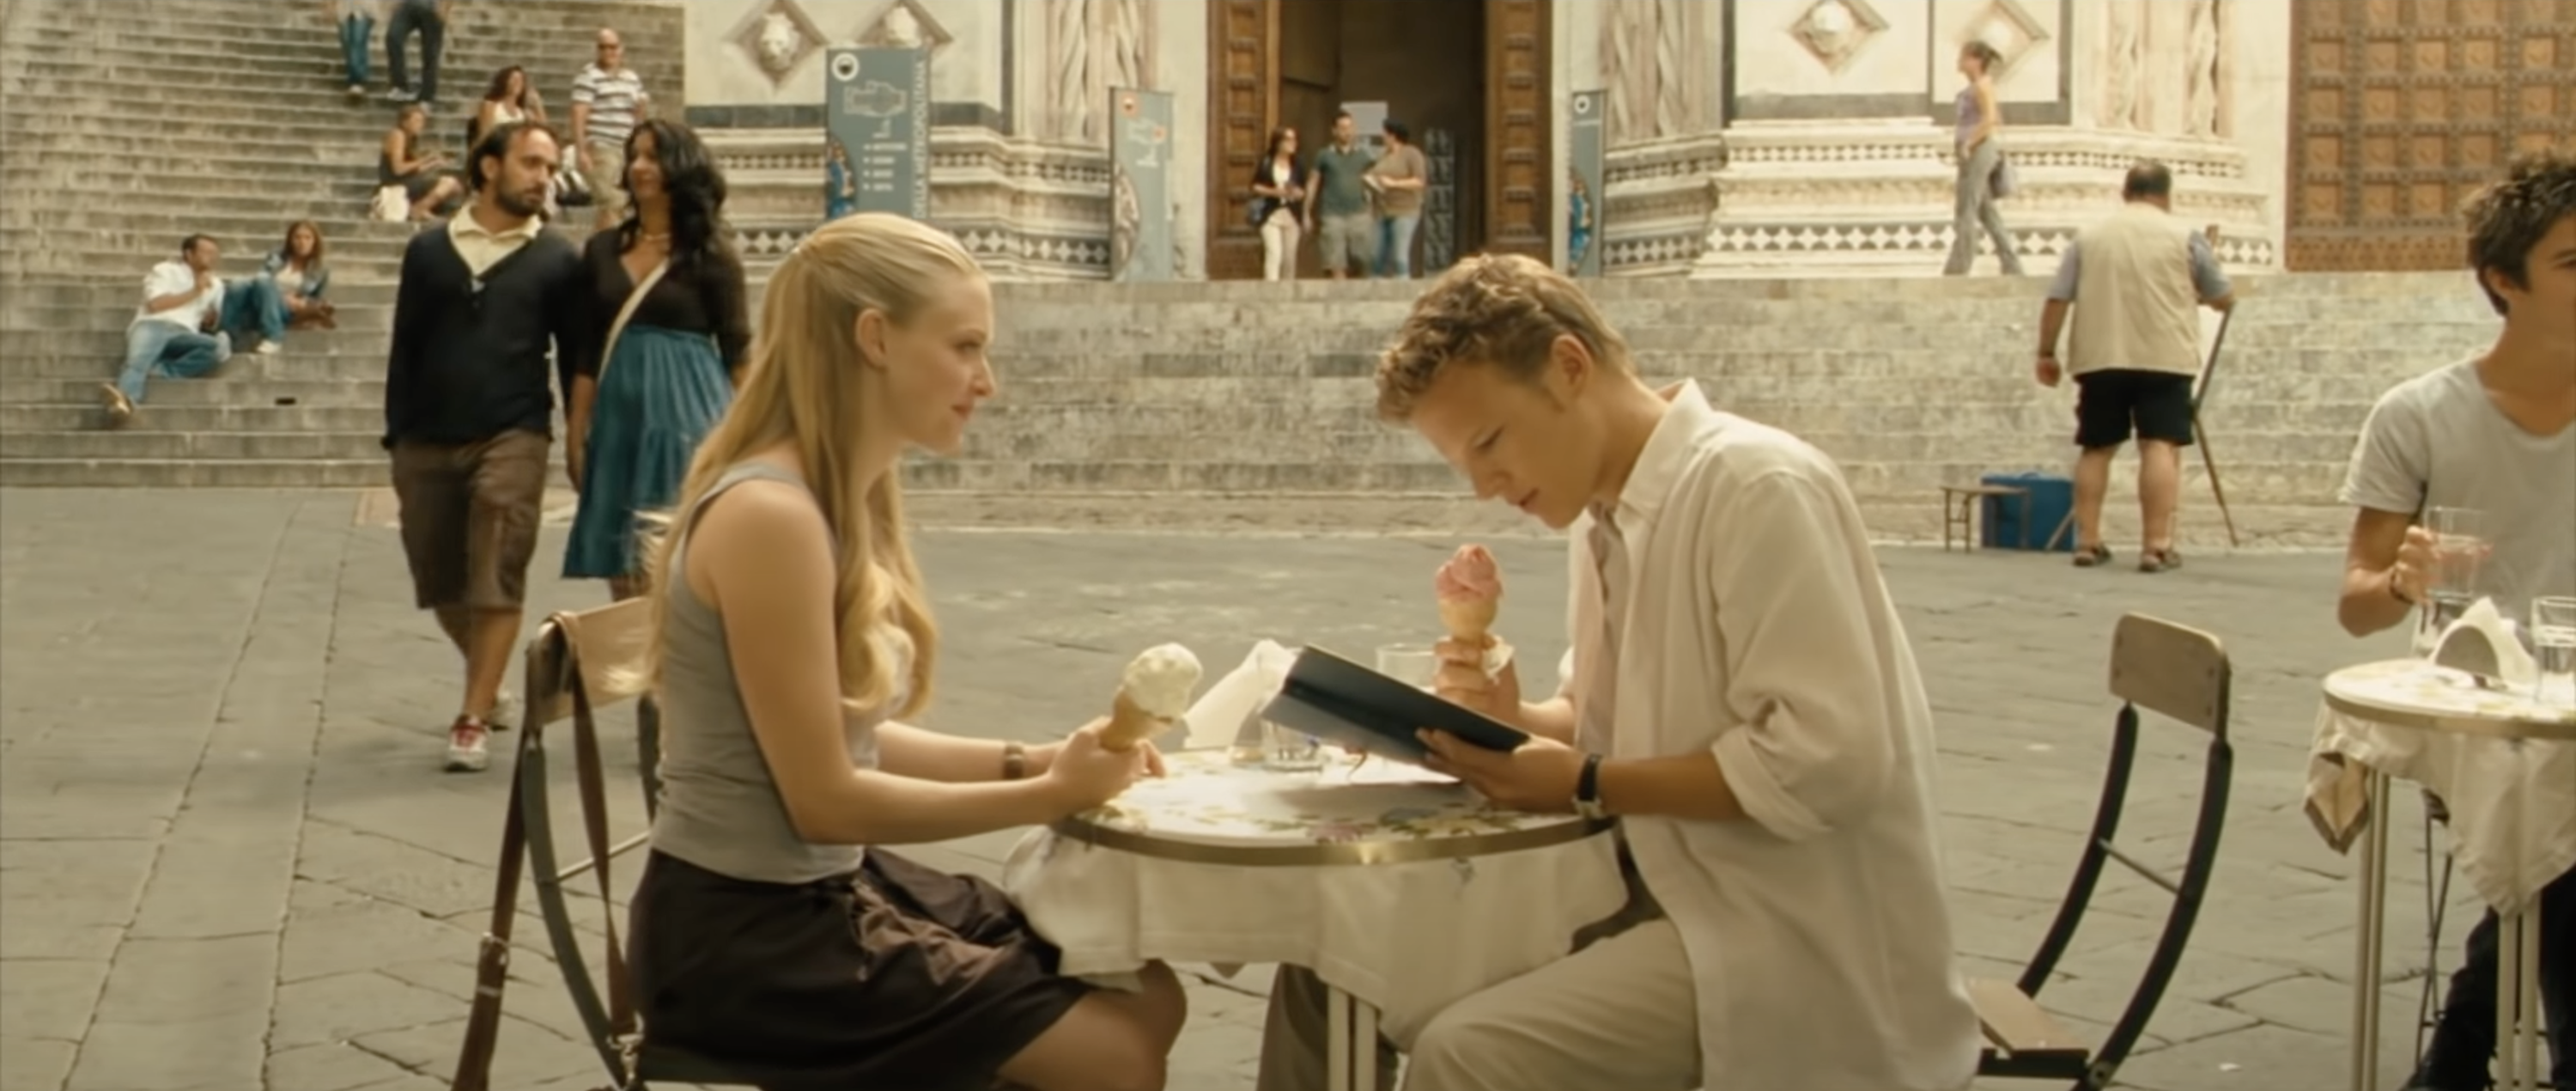 Amanda Seyfried as Sophie and Christopher Egan as Charlie sit together in Italy in &quot;Letters to Juliet&quot;